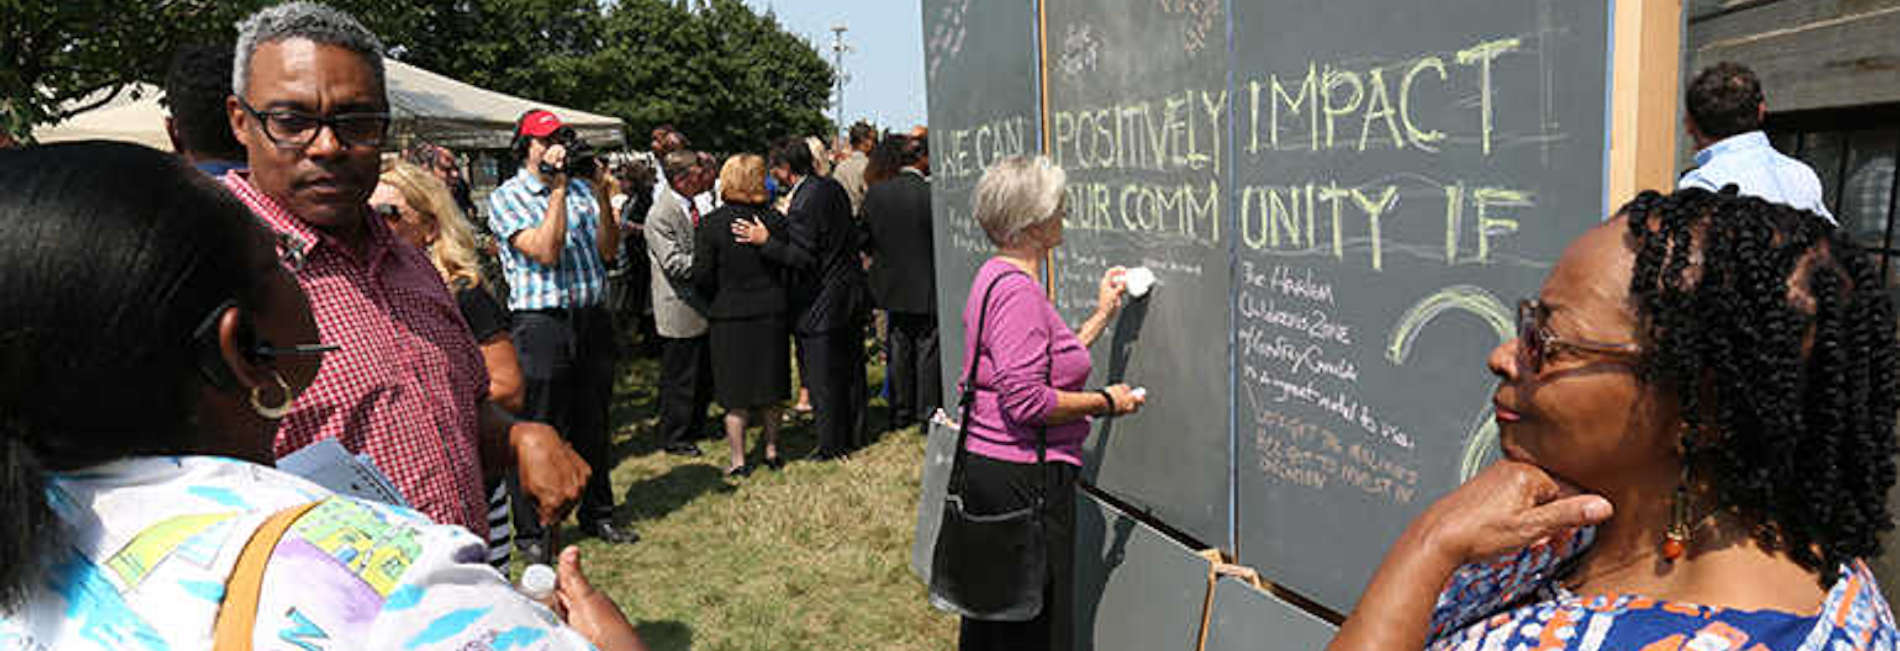 Community improvement event with outdoor chalkboards for ideas.